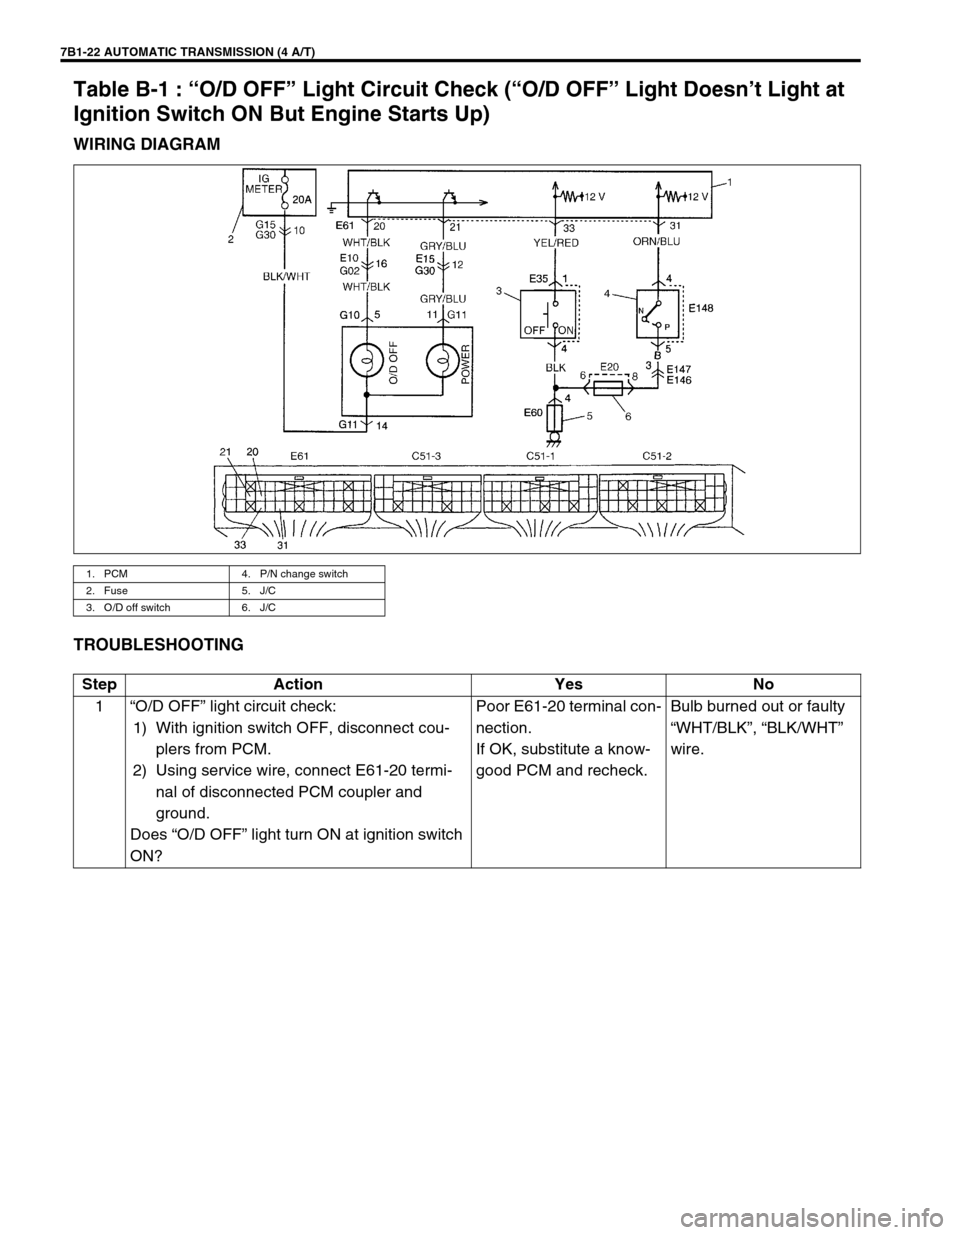 SUZUKI GRAND VITARA 2001 2.G User Guide 7B1-22 AUTOMATIC TRANSMISSION (4 A/T)
Table B-1 : “O/D OFF” Light Circuit Check (“O/D OFF” Light Doesn’t Light at 
Ignition Switch ON But Engine Starts Up)
WIRING DIAGRAM
TROUBLESHOOTING
1. 